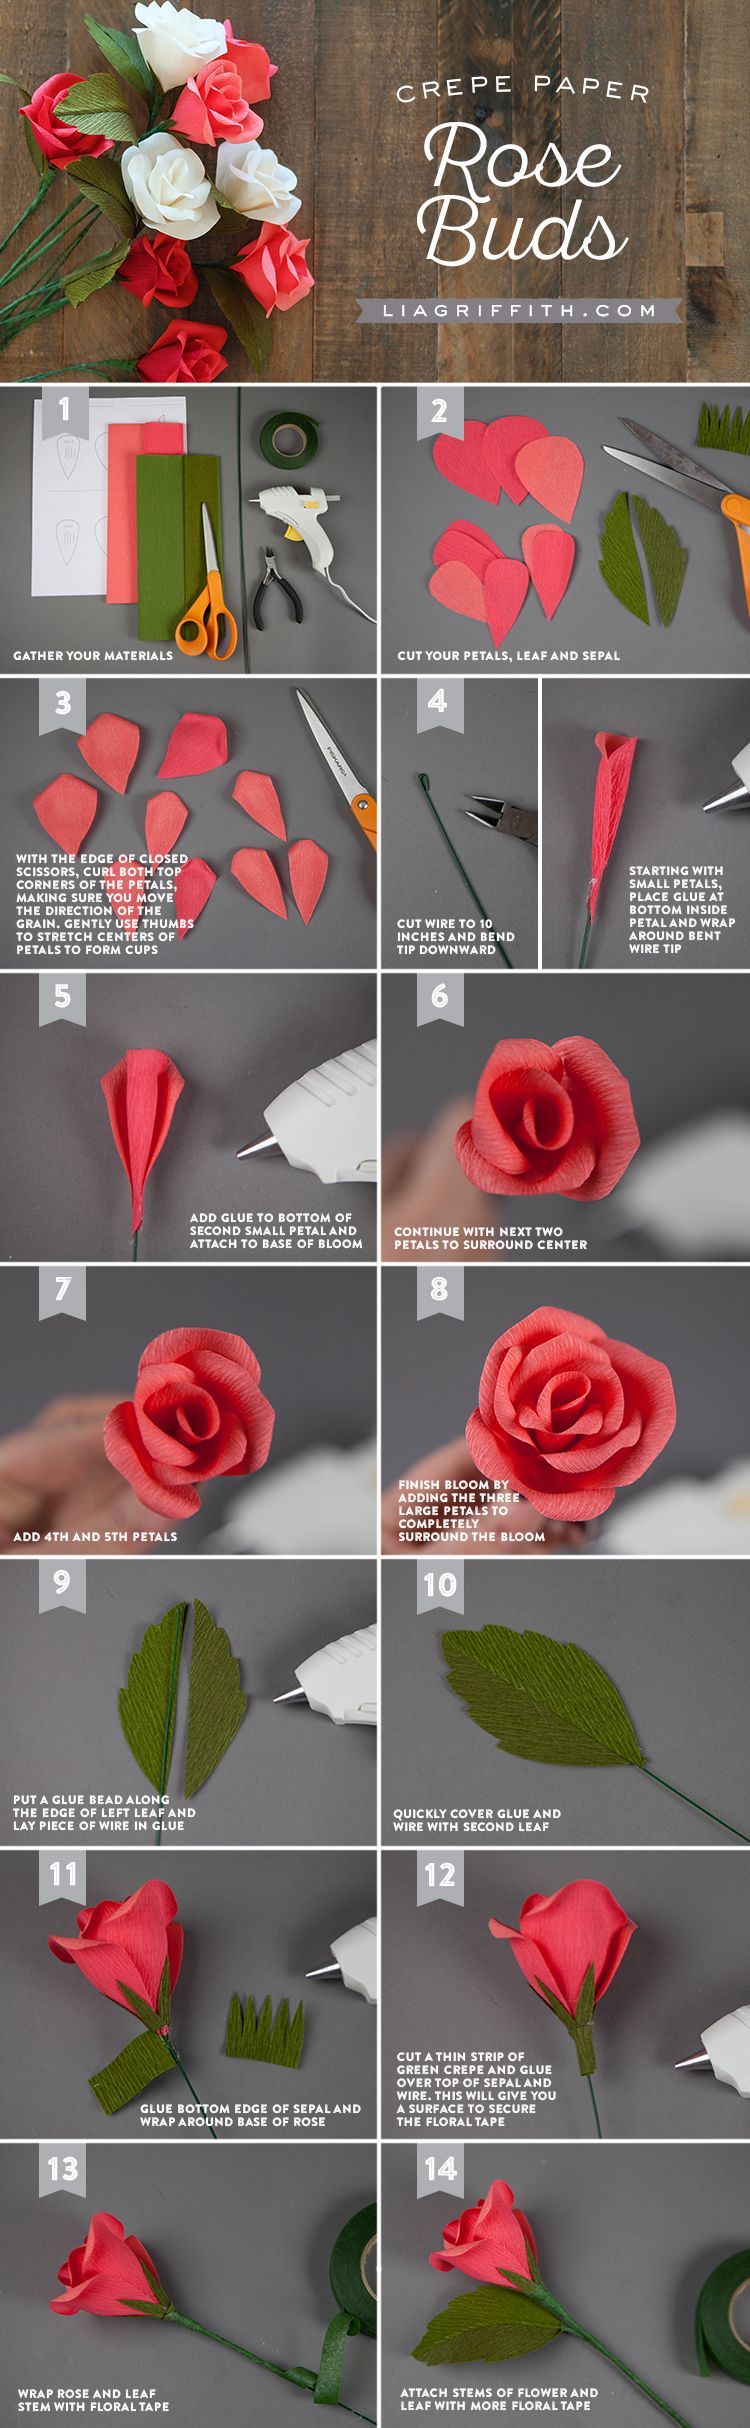 Learn how to make crepe paper rose buds by hand with our printable template and photo tutorial, perfect for a homemade gift to a